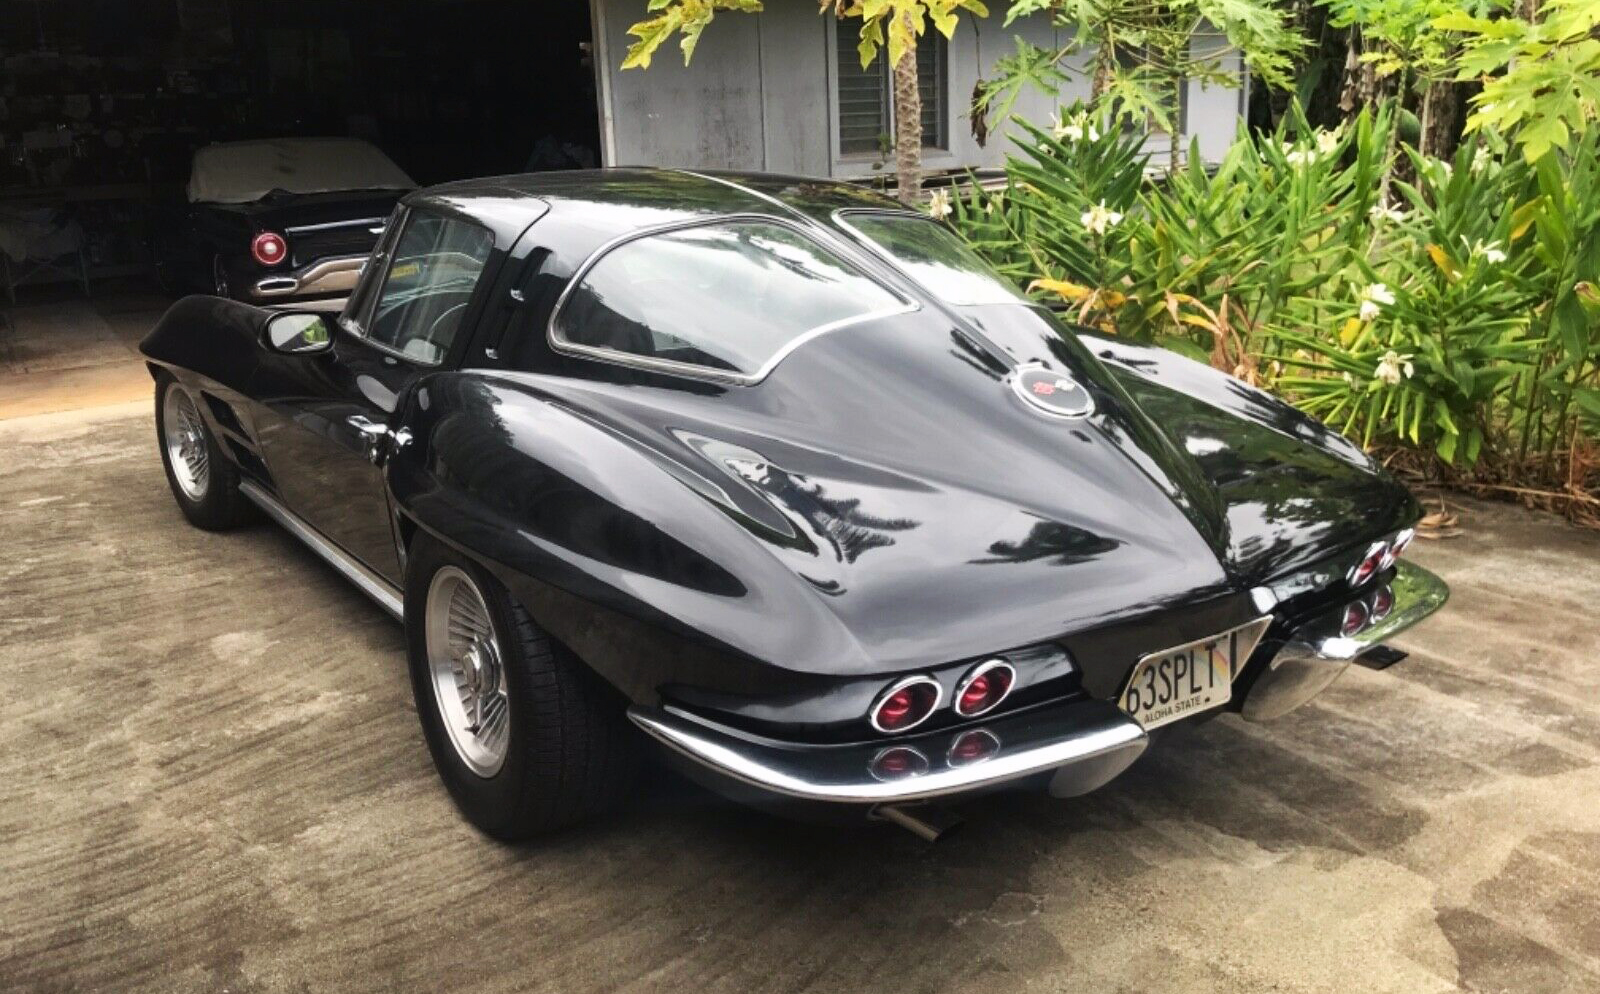 Rear exterior view of a 1963 Chevy Corvette, an example of the second generation of Corvettes.